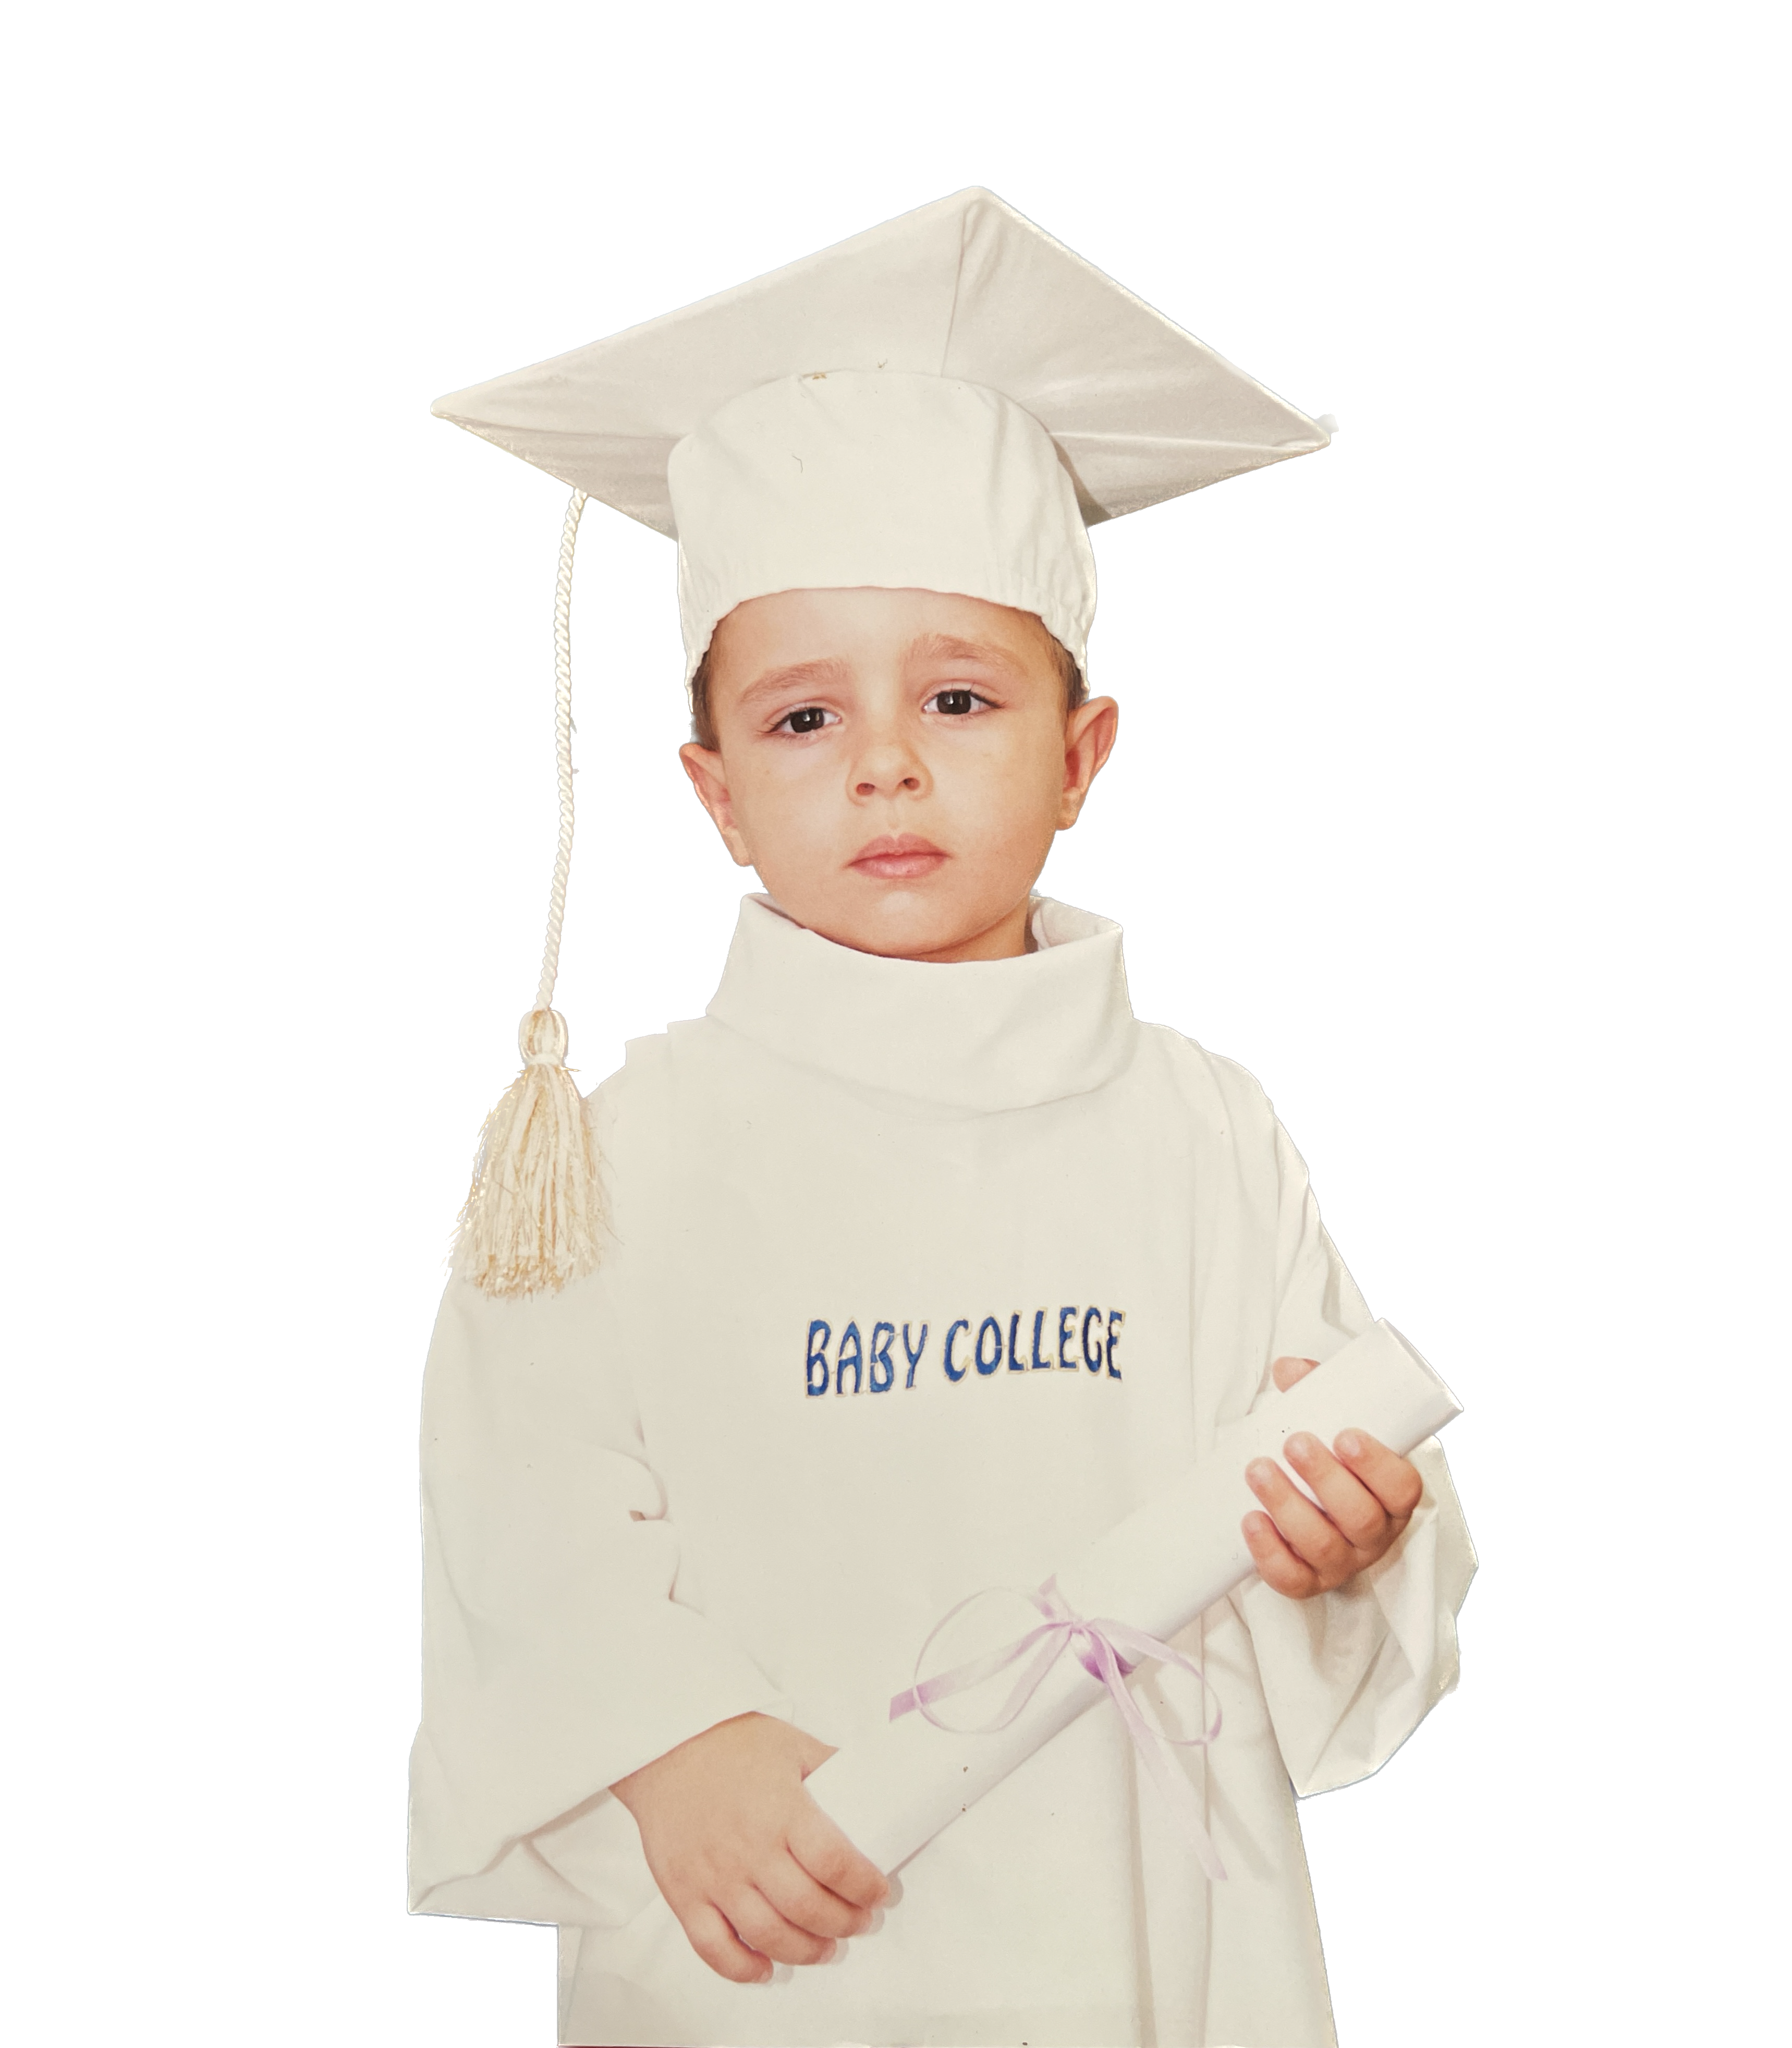 A picture of a young child wearing a graduation gown and cao and holding a diploma.